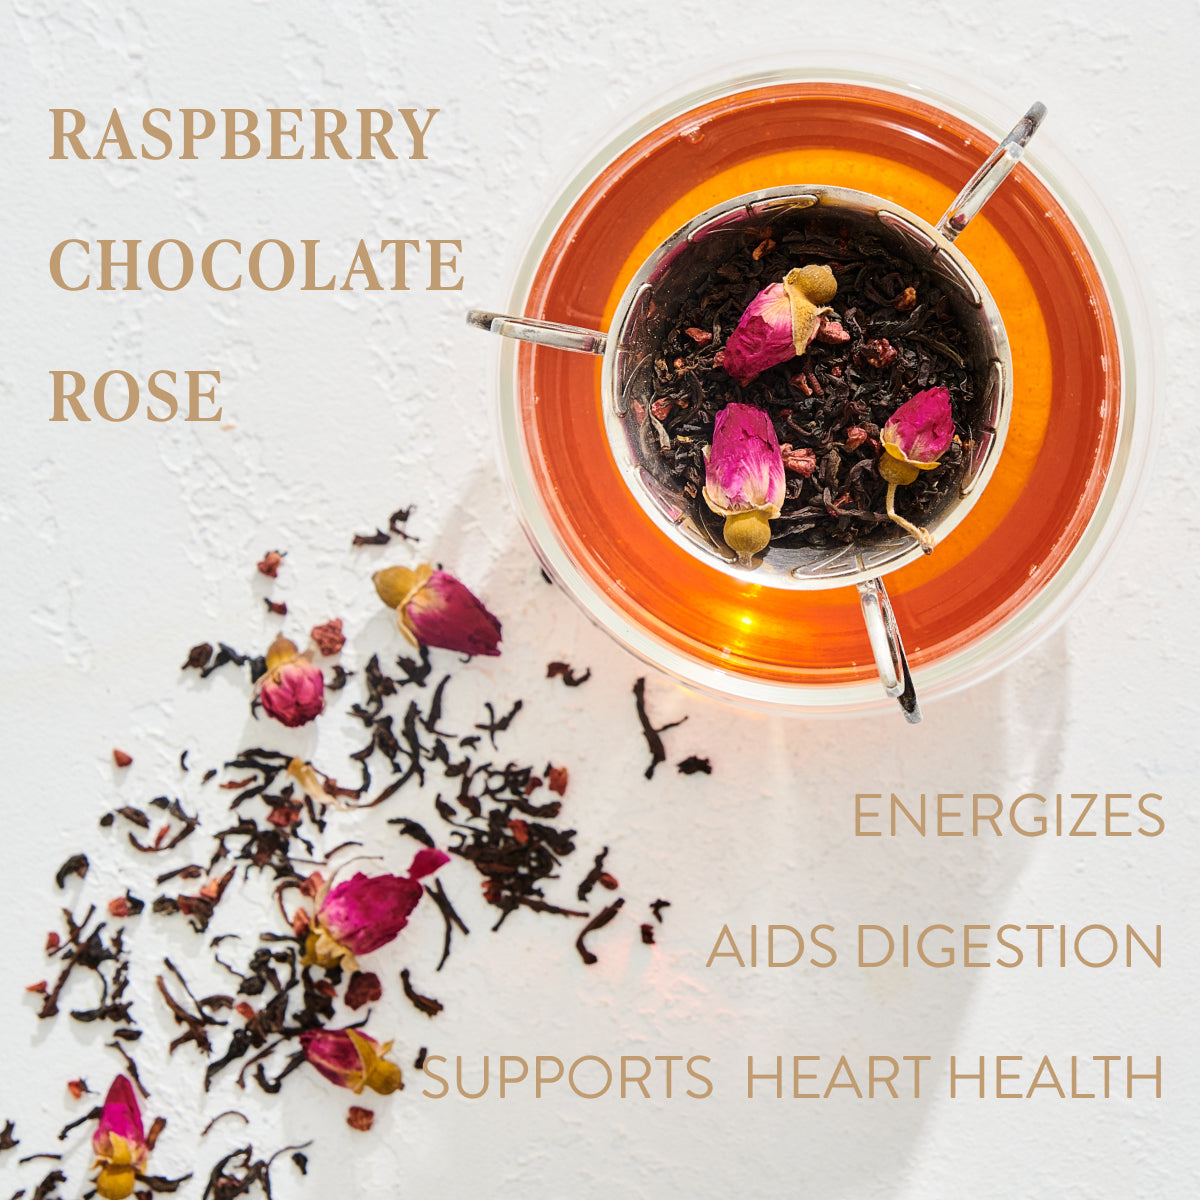 A glass cup of tea with loose leaf tea leaves, rose petals, and a tea infuser sits on a white surface. The tea is a rosy-brown color. Text around the image reads: "SOULMATE: CHOCOLATE-RASPBERRY-ROSE BLACK TEA FOR FINDING & CELEBRATING LOVE," "ENERGIZES," "AIDS DIGESTION," and "SUPPORTS HEART HEALTH." Experience the magic hour with organic tea bliss from Magic Hour.